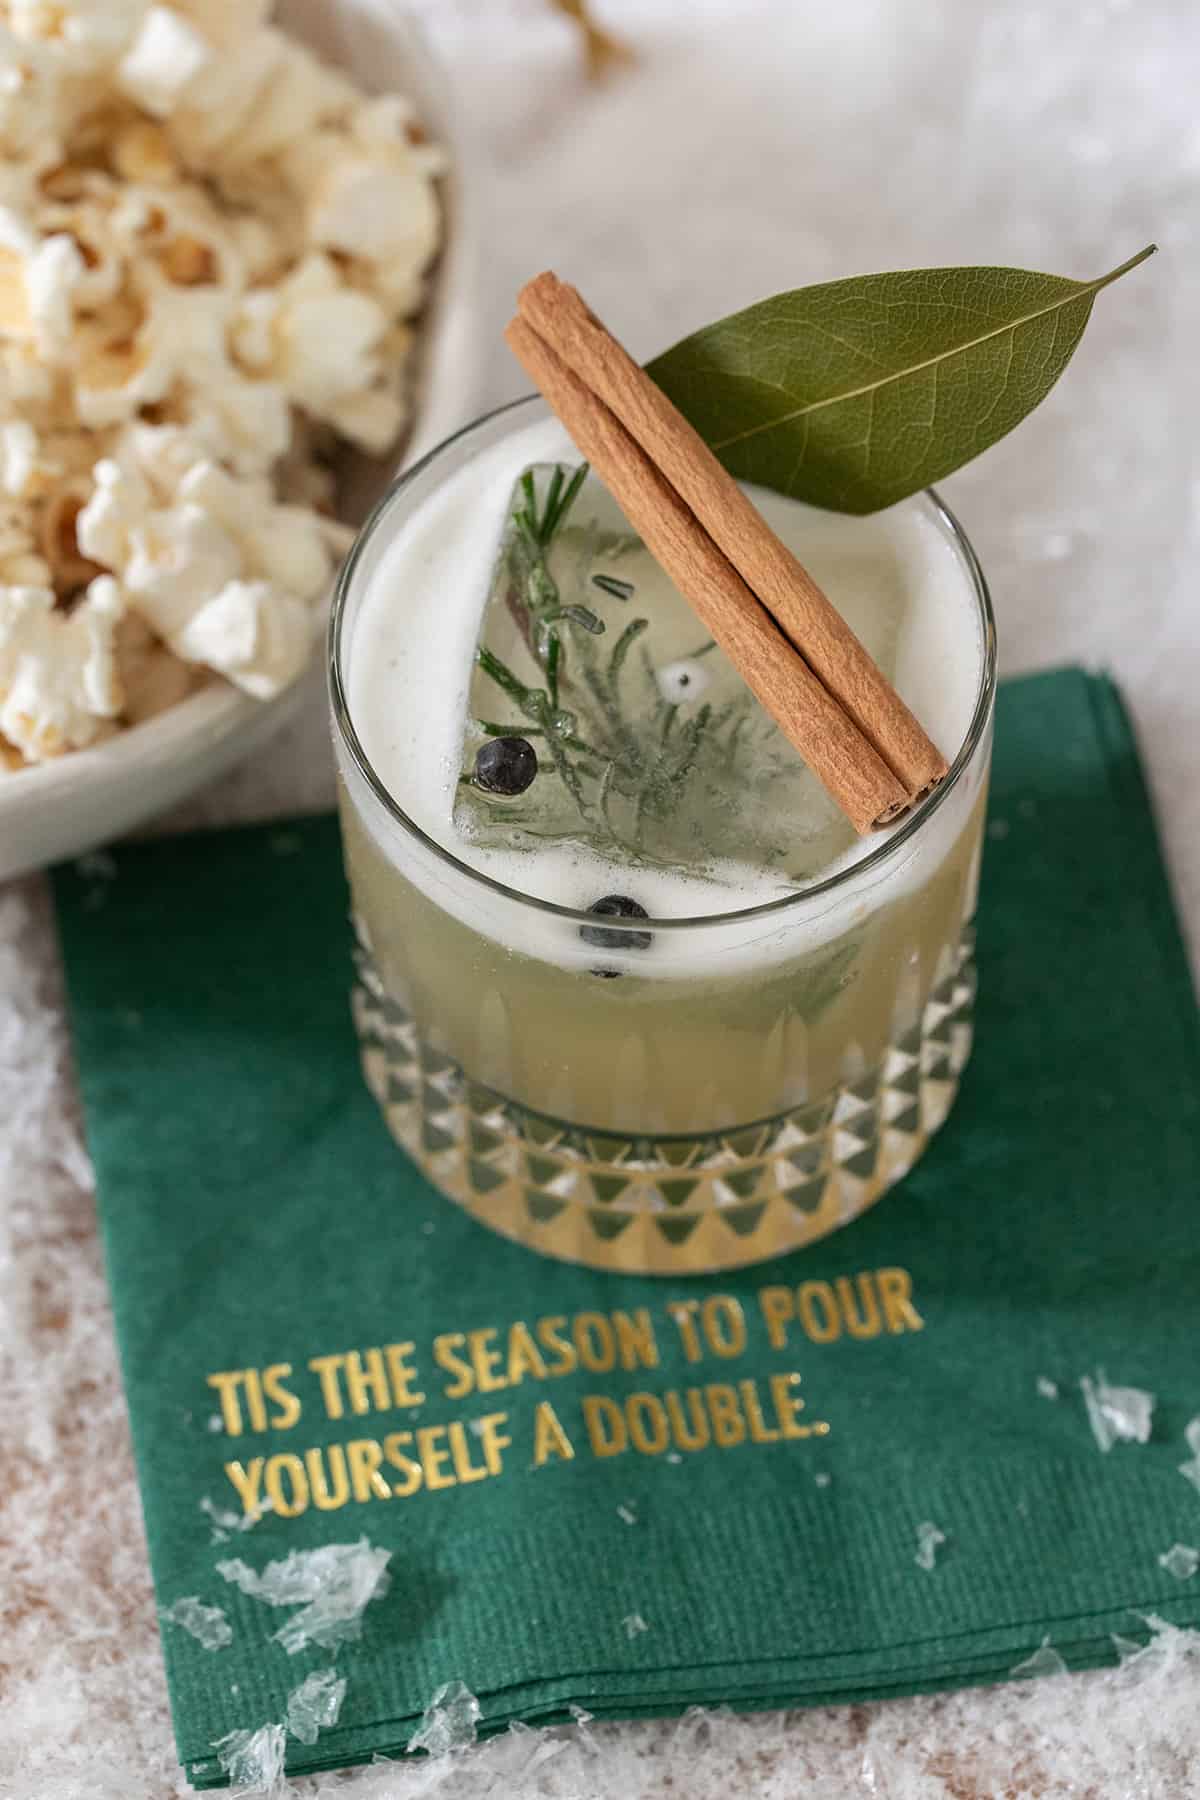 Whiskey sour cocktail recipe with rosemary and spices.